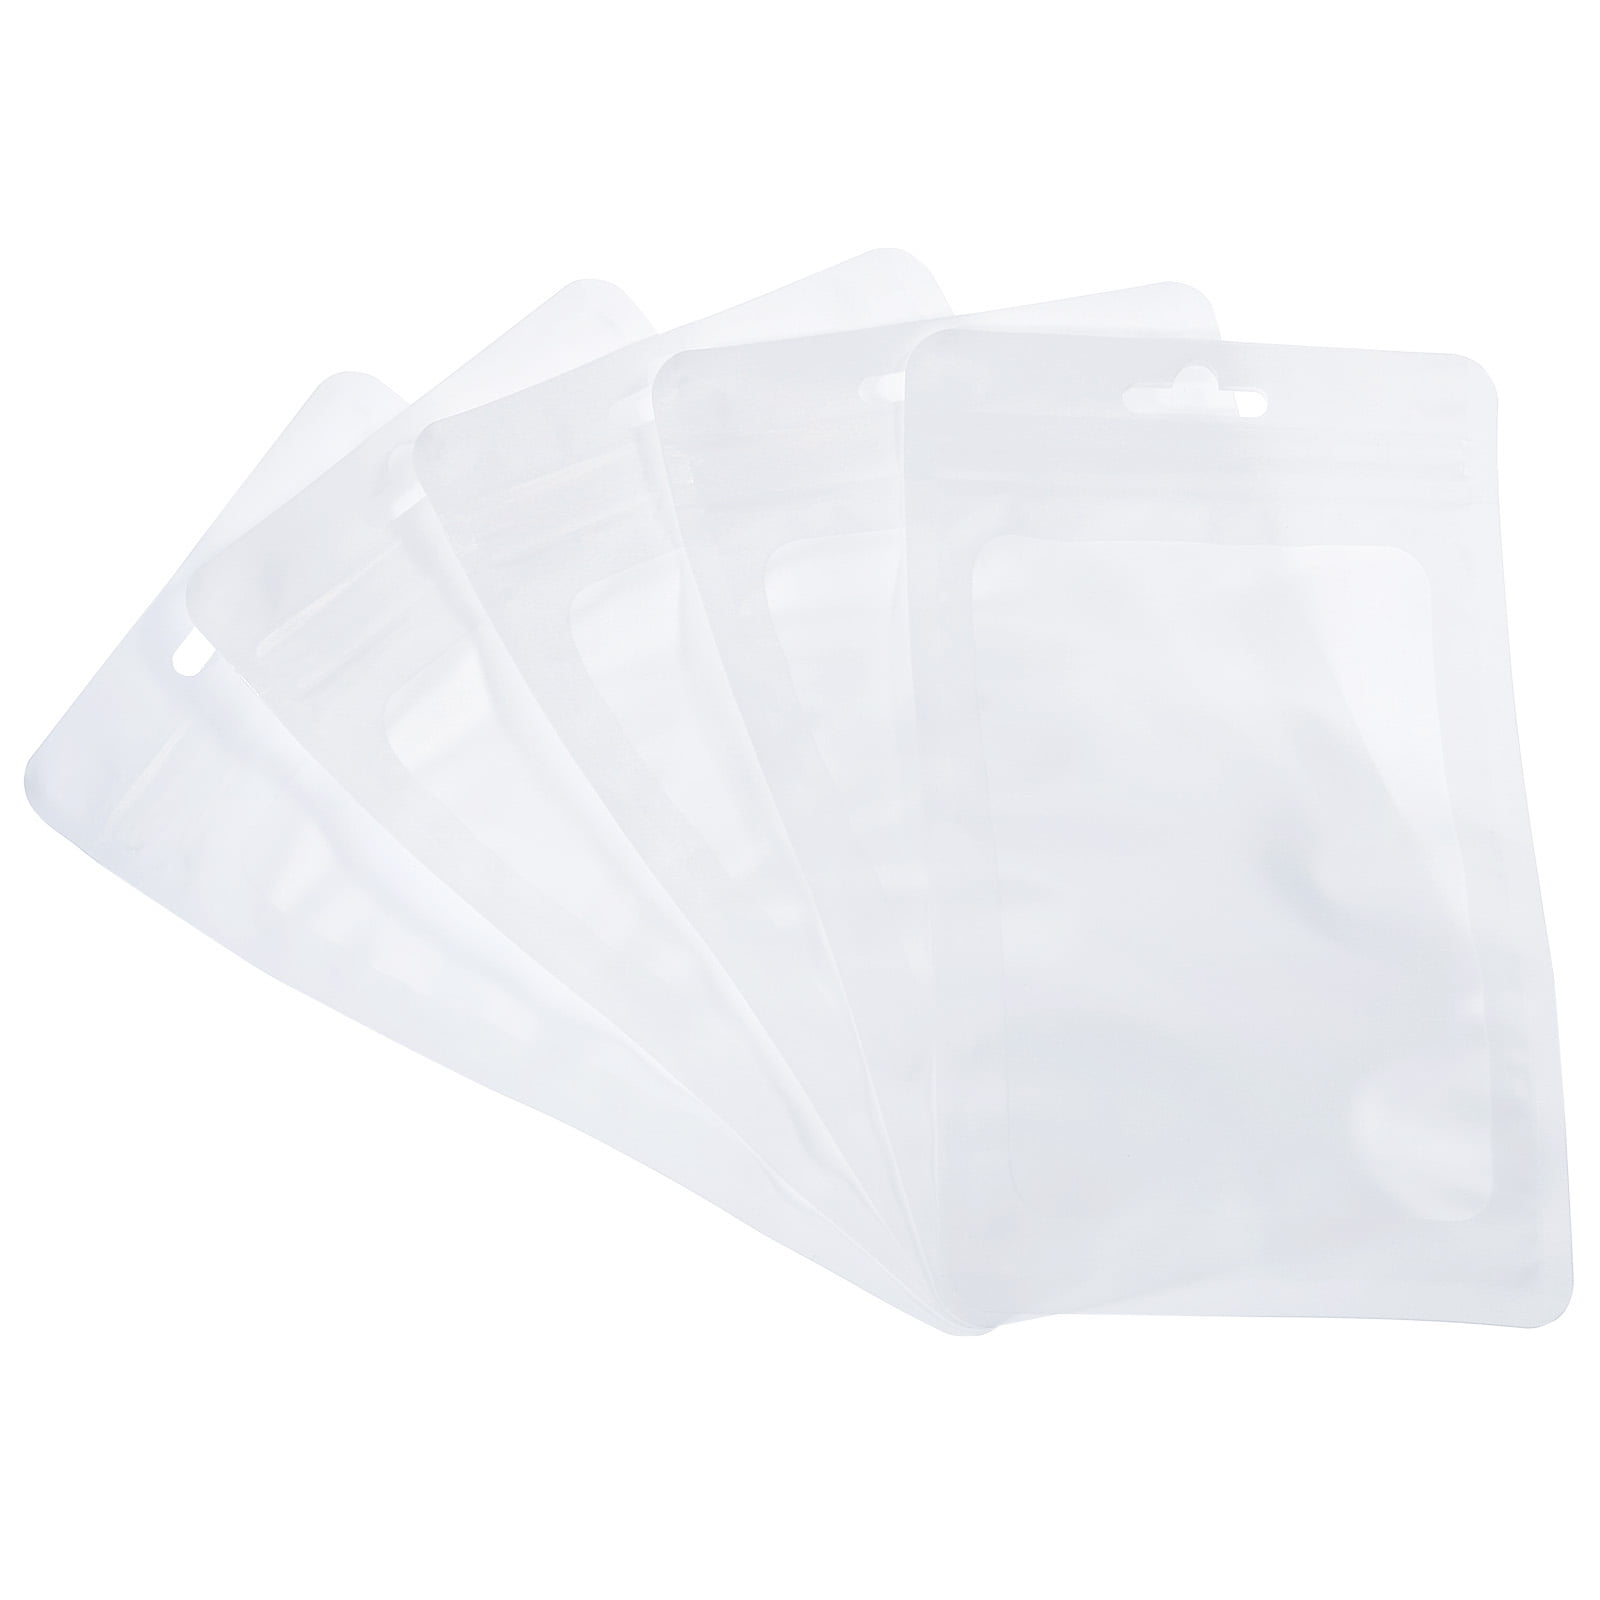 100 Cello Bags: 2.75 x 3.75 inch (Trading Card Size), Resealable 2 3/4 x 3  3/4